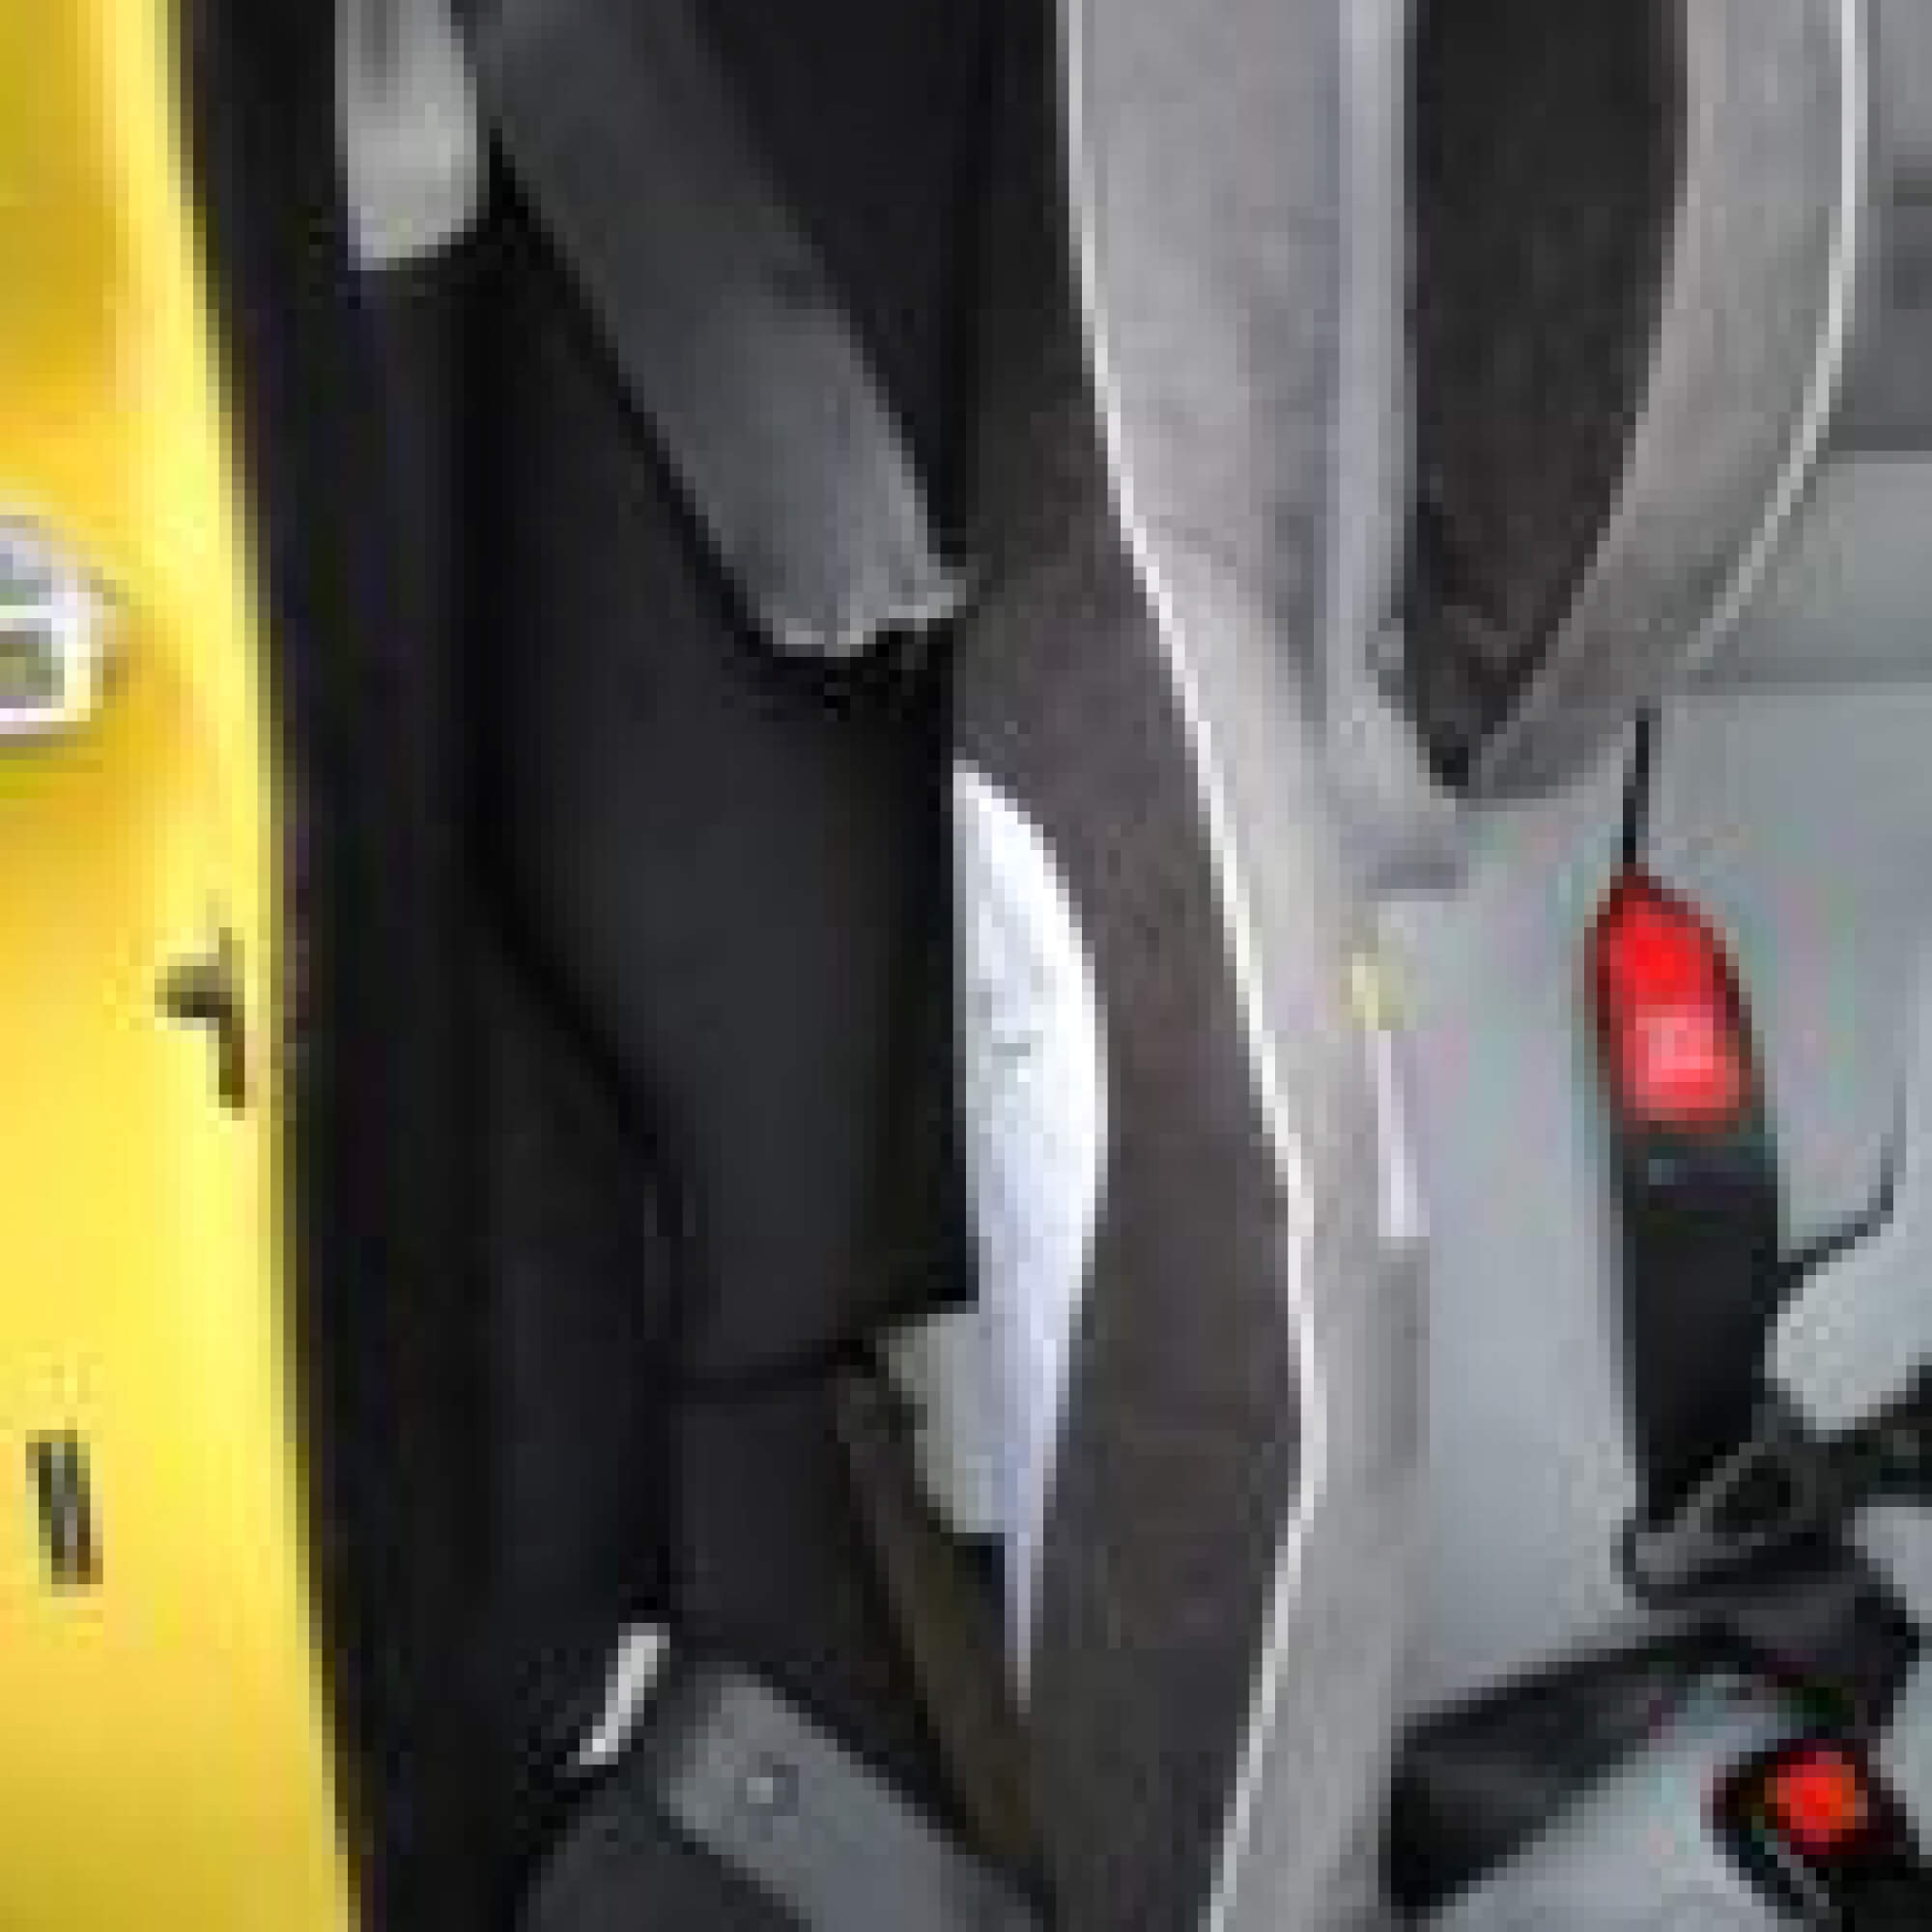 Miles's Carseat that caused the injury